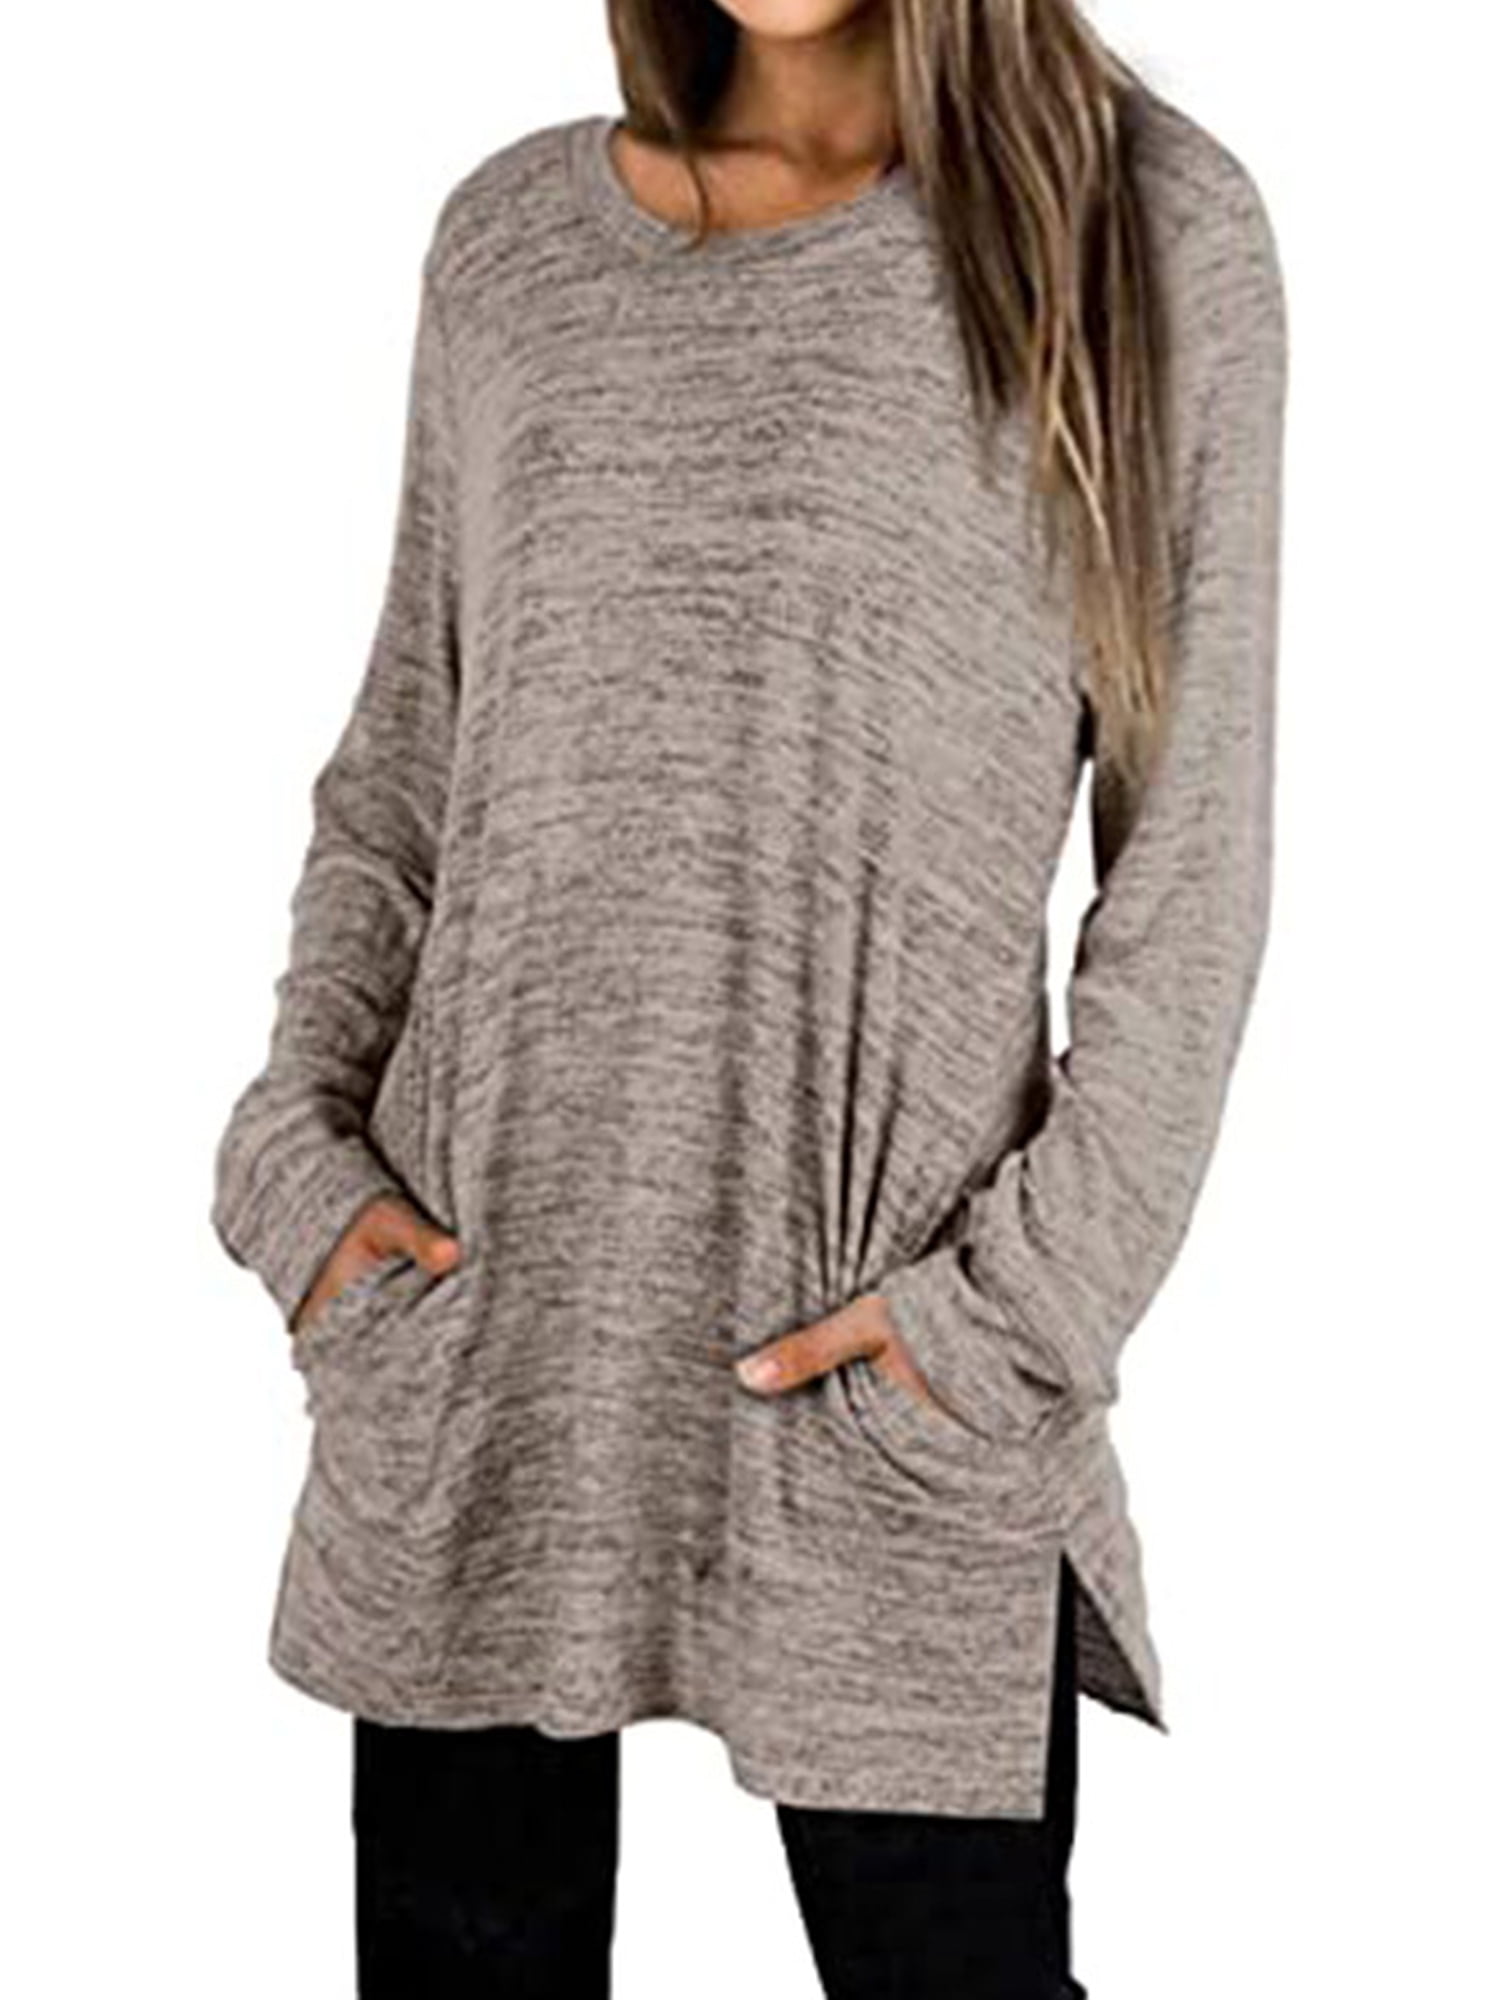 POROPL Tunic Tops To Wear With Leggings,Women Ladies Large Size Button Lace  V Neck Long Sleeve Shirt Blous - Walmart.com